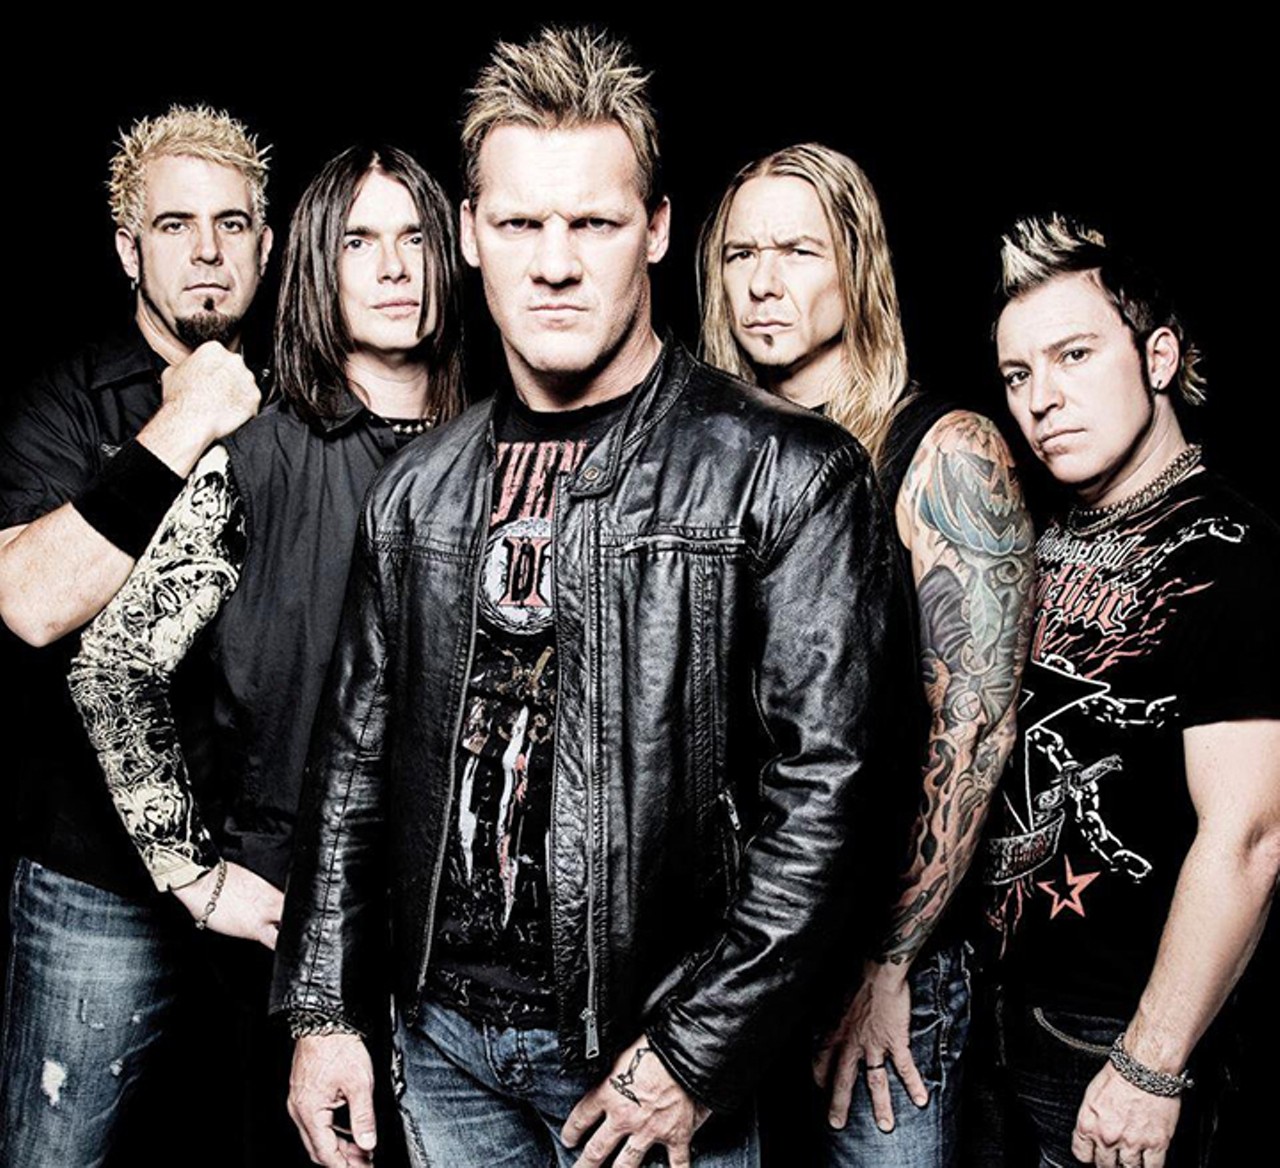 Thursday, Sept. 27Fozzy at House of Blues